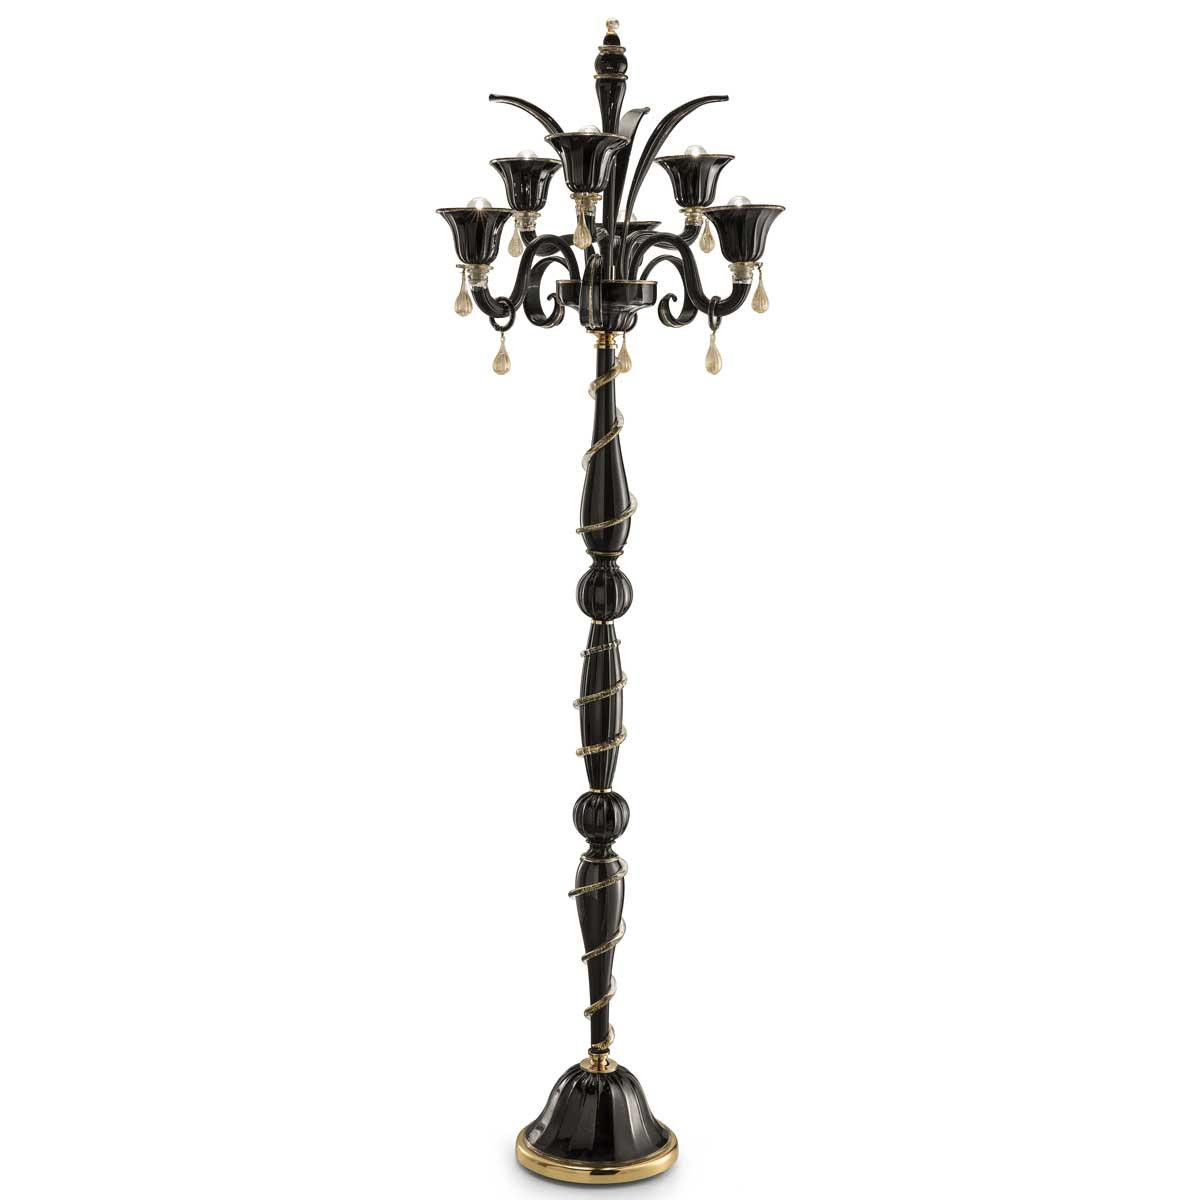 "Enia" Murano glass floor lamp - 6 lights - black and gold